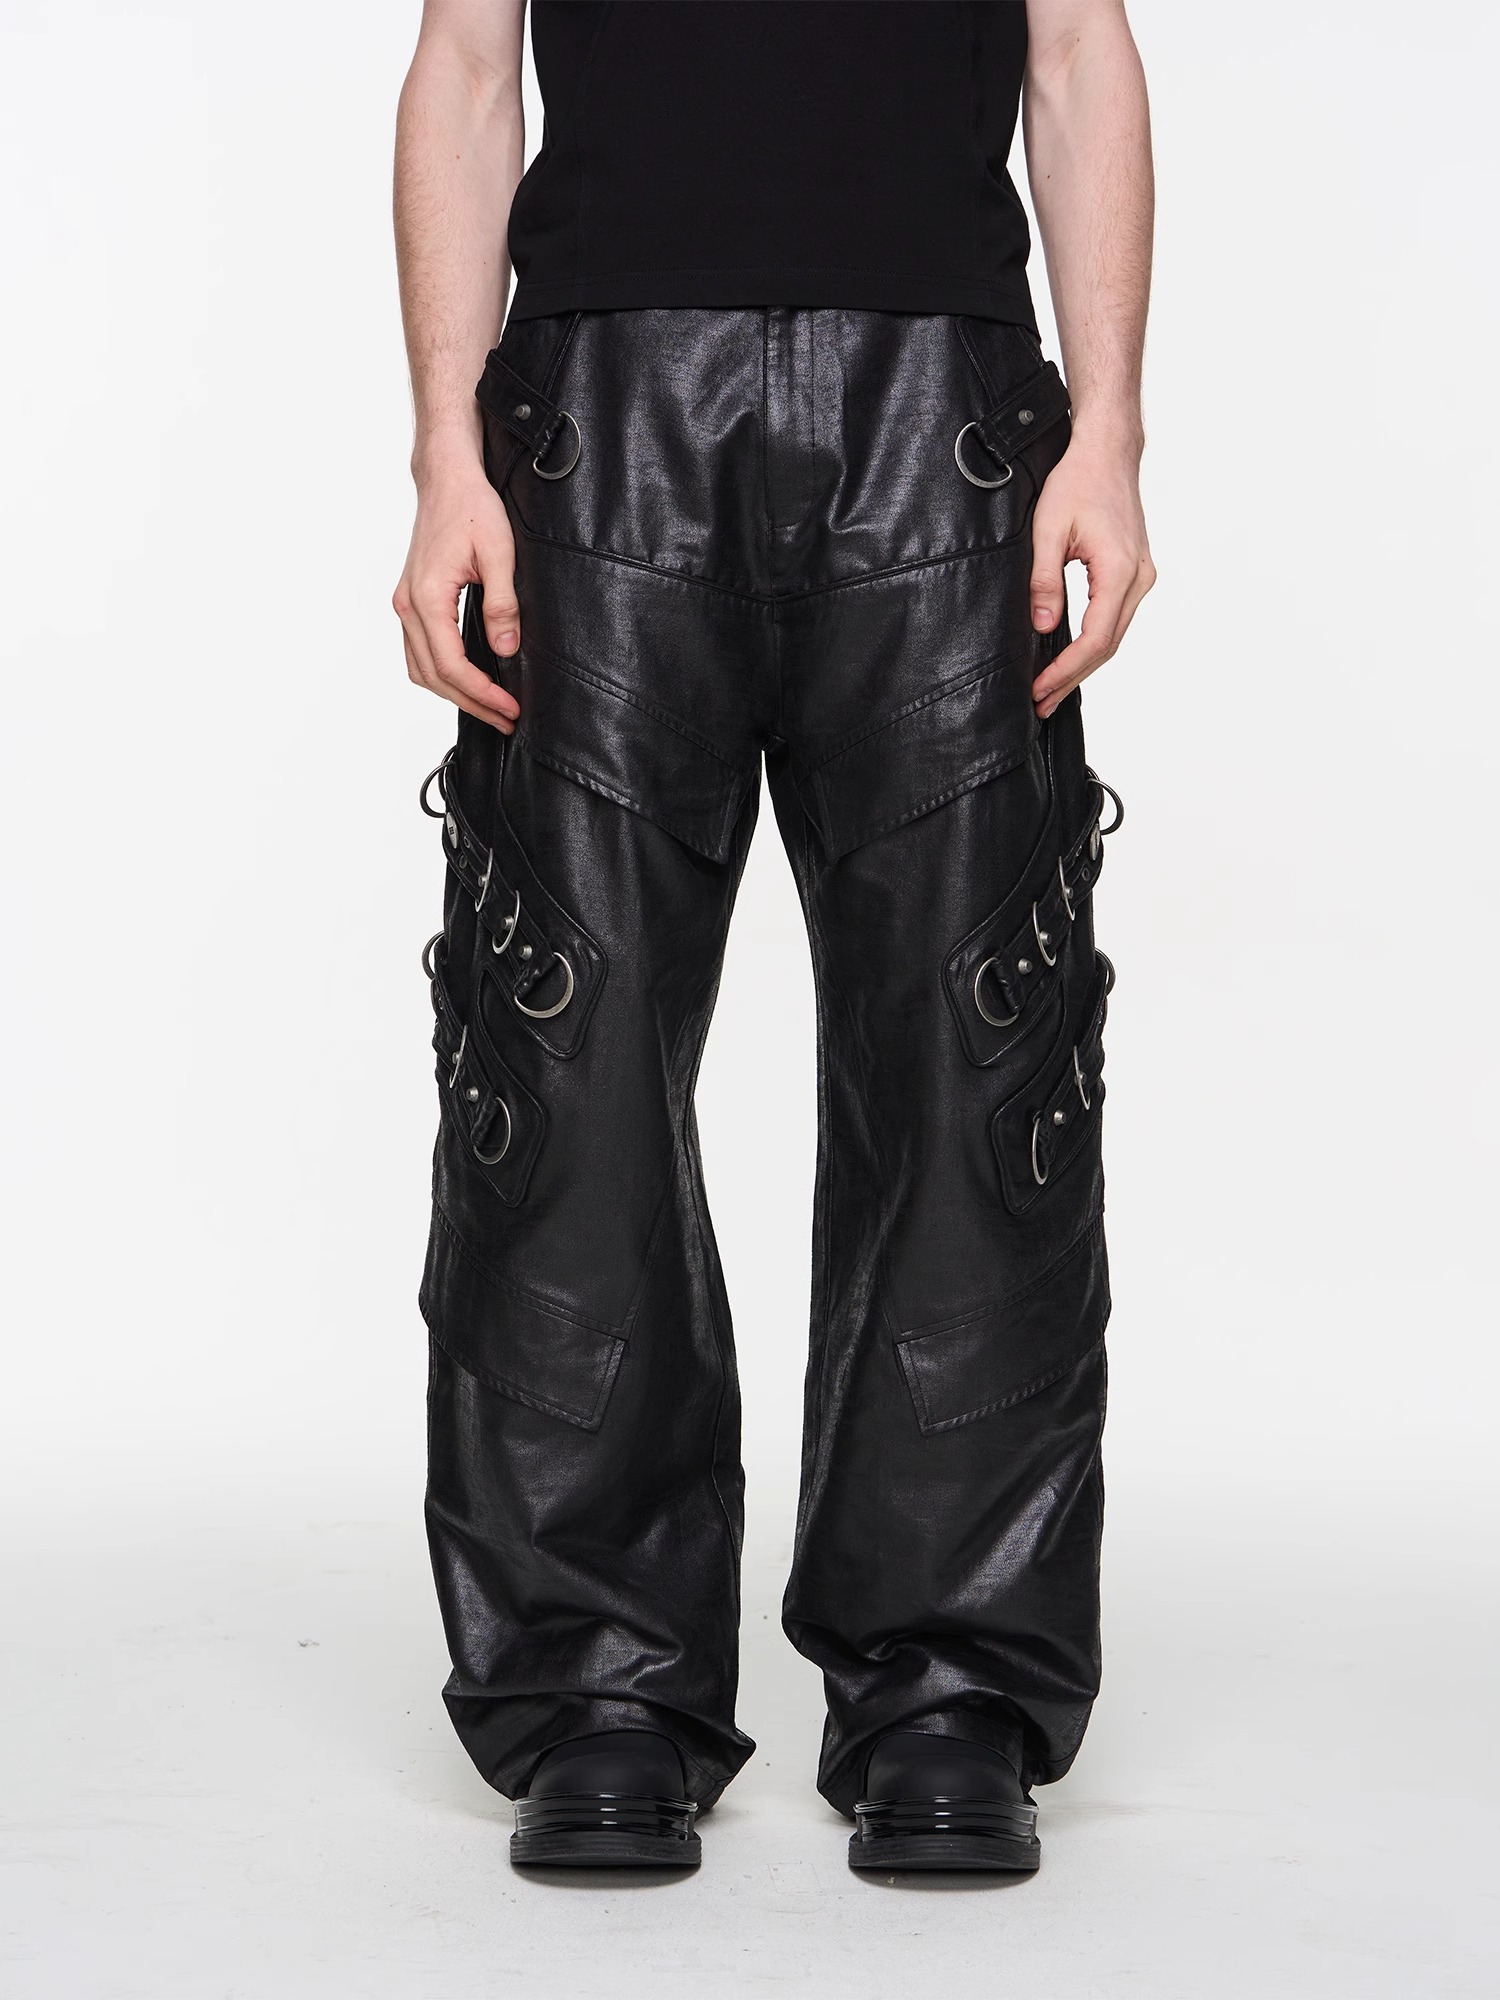 BLINDNOPLAN 24SS Heavy-duty Metal Trim Decorated Work Pants